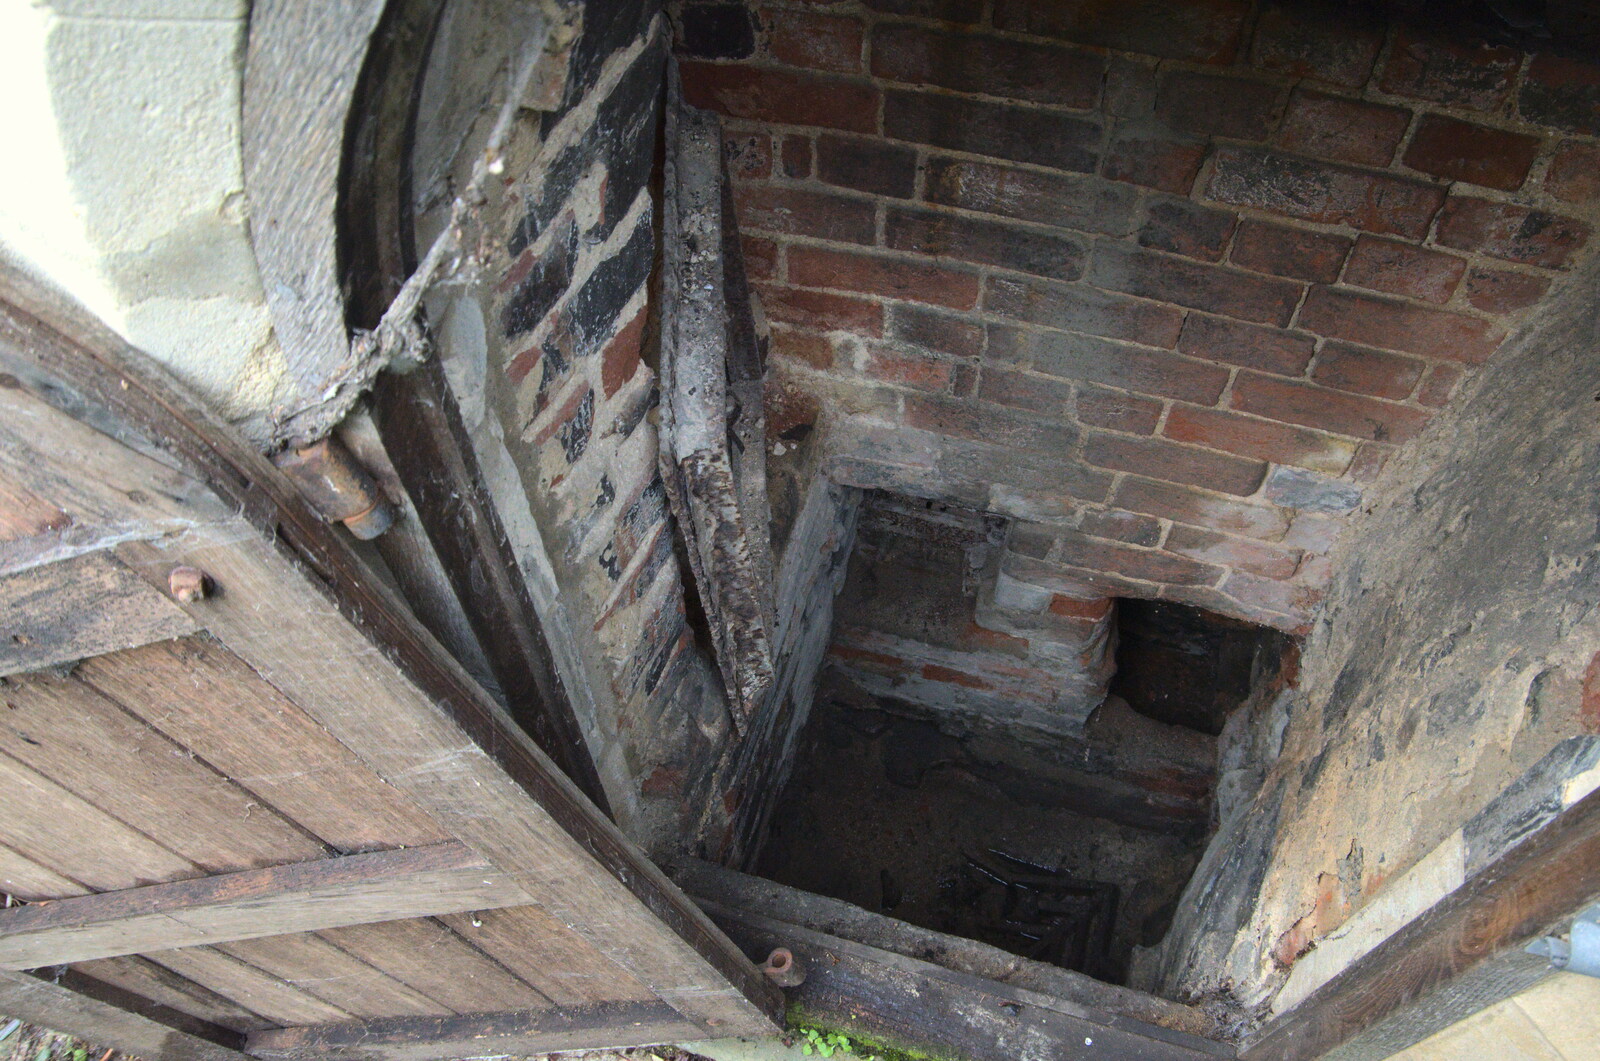 The curious innards of a church tower from Fun With Ice in Lockdown, Brome, Suffolk - 10th January 2021